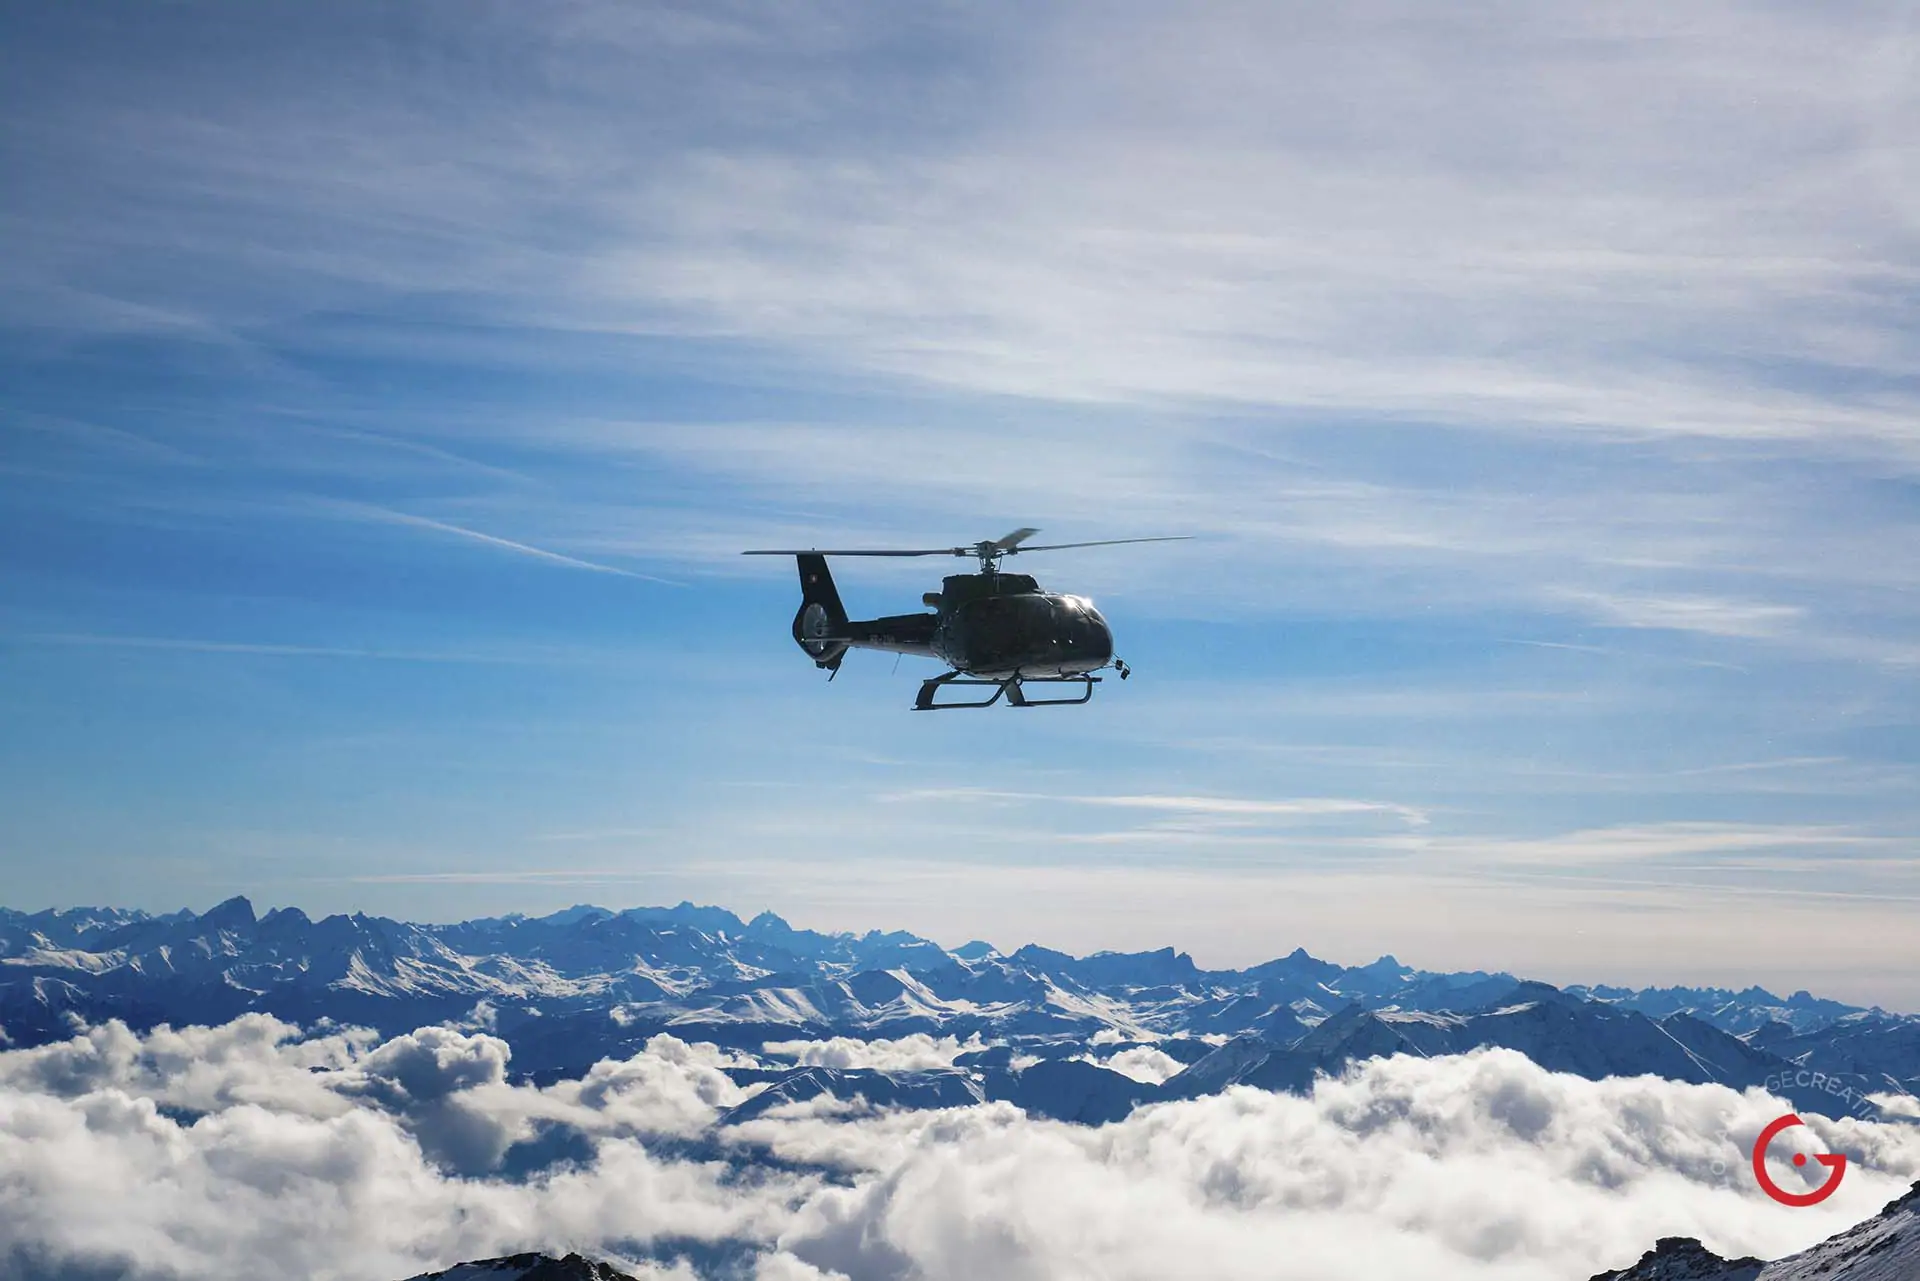 A Private Helicopter Hovers Over The Snow Covered Swiss Alps - Travel Photographer and Switzerland Photography